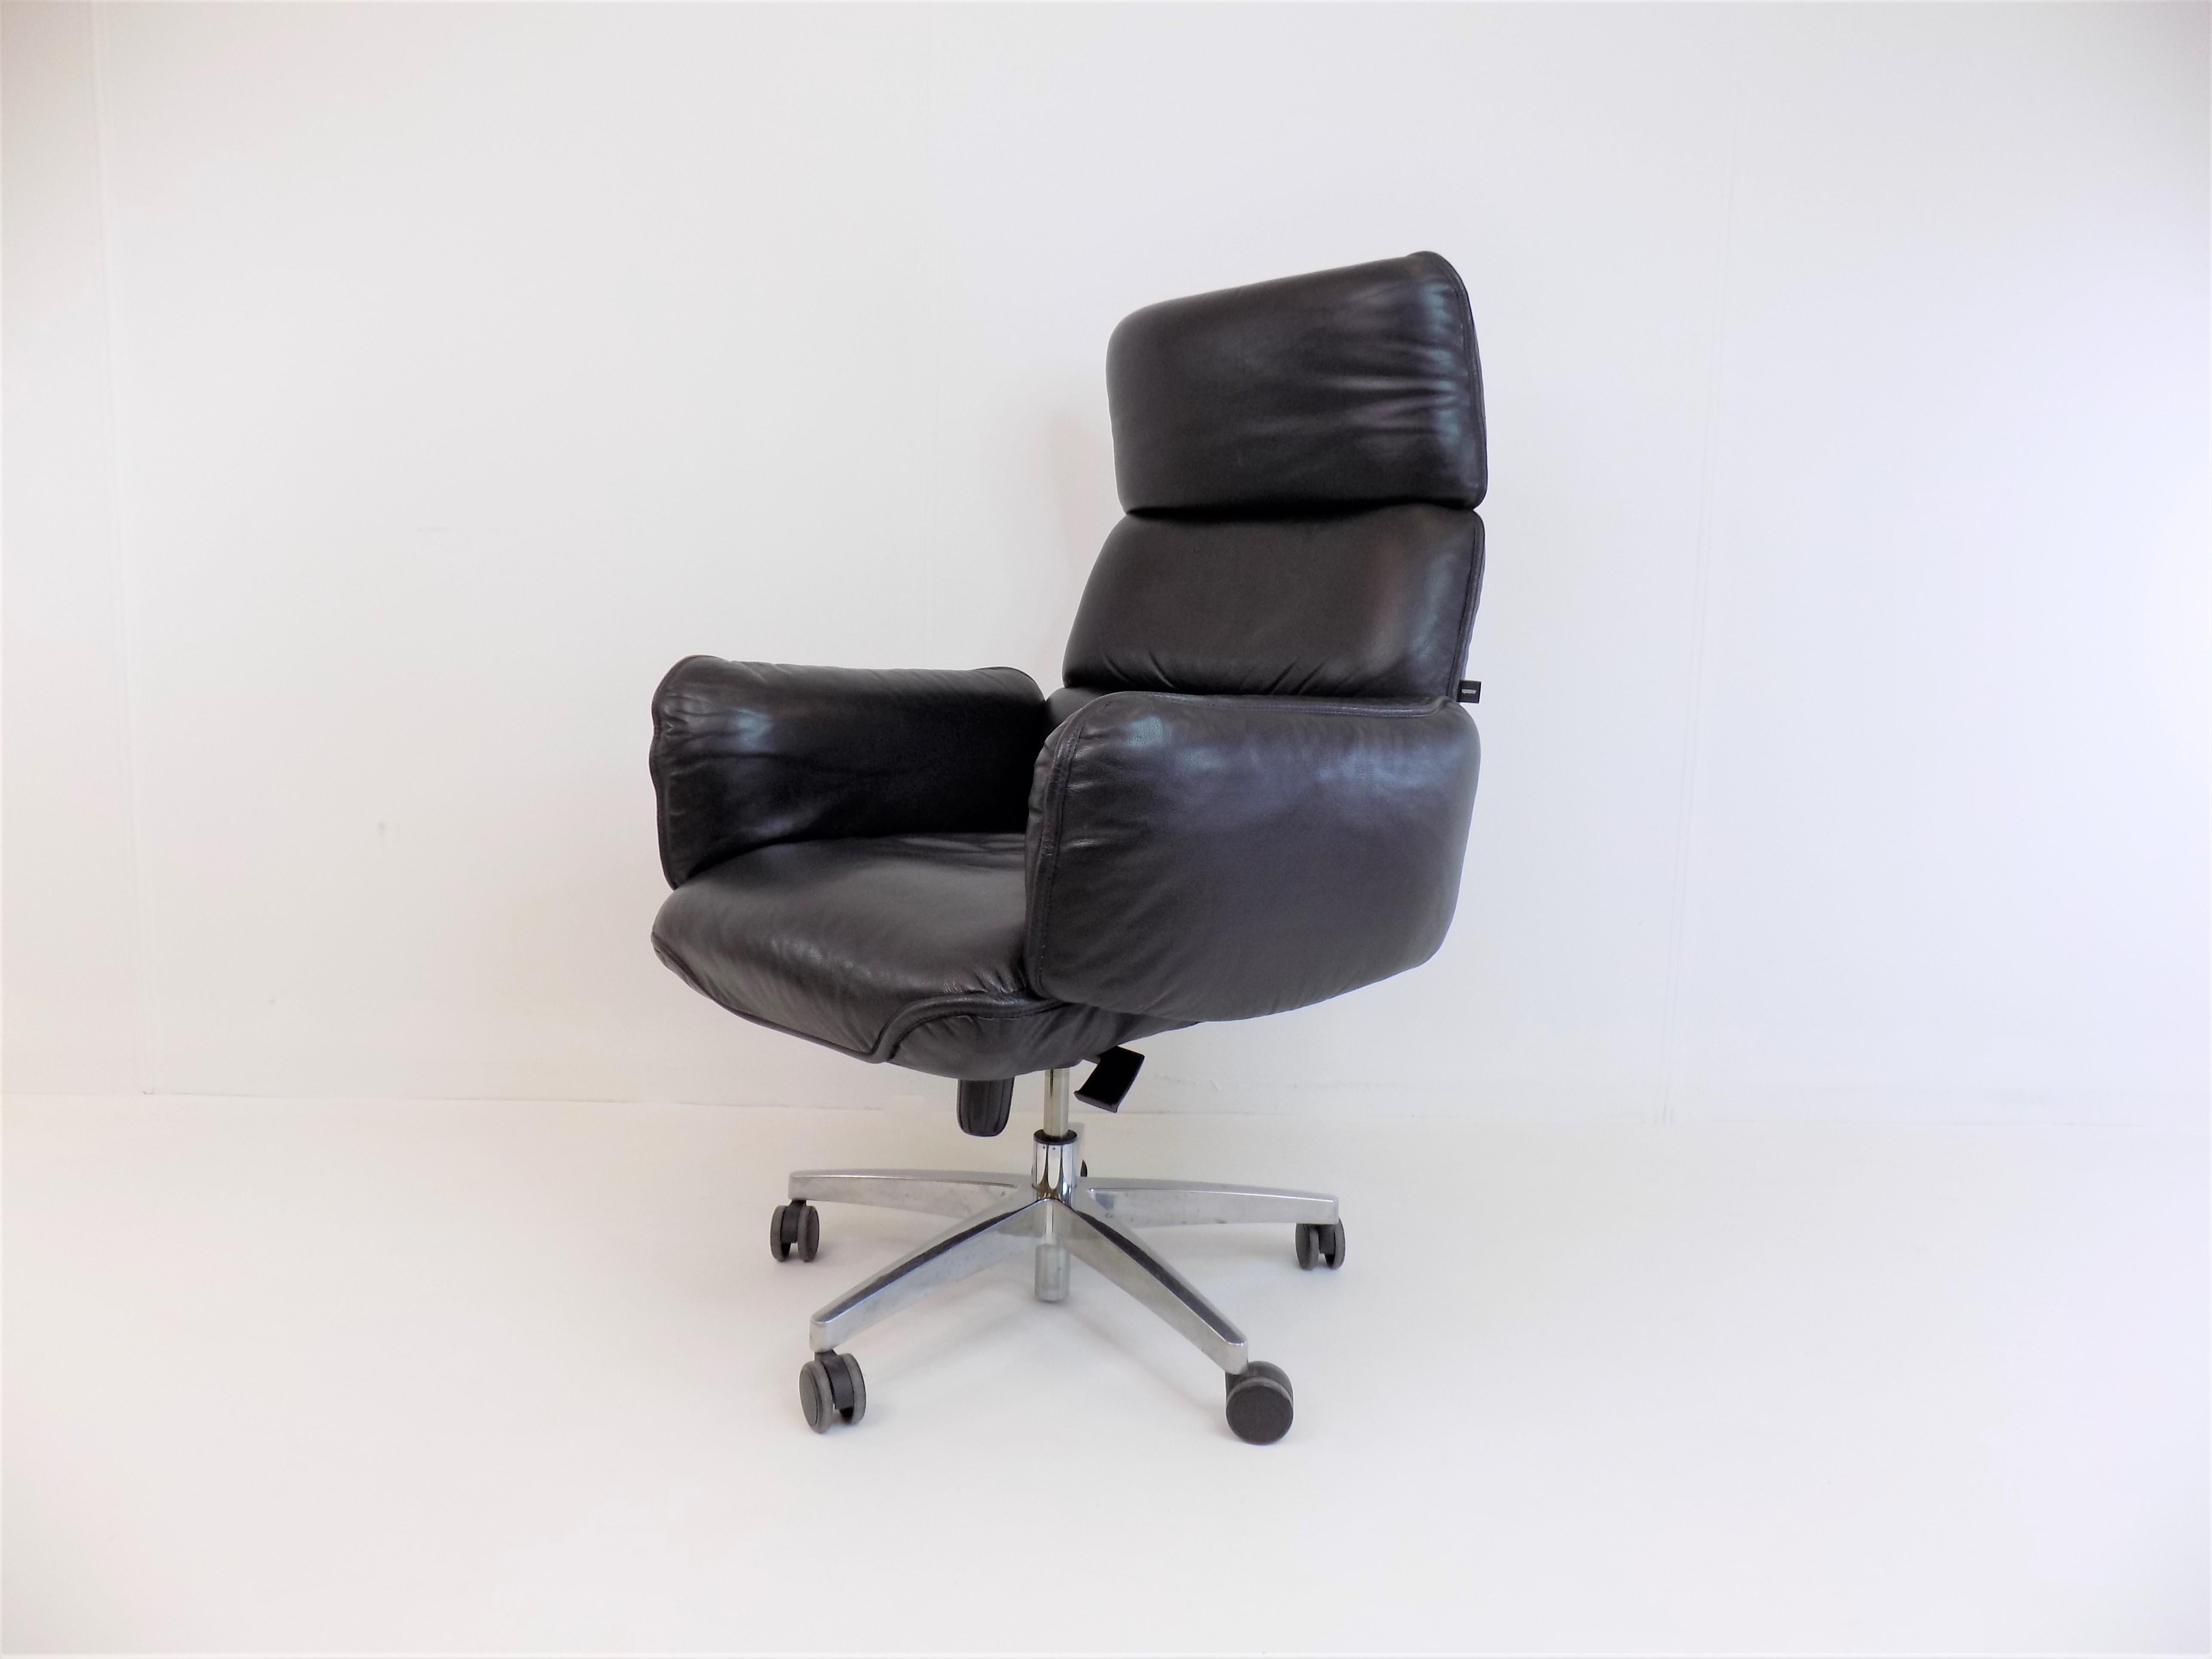 This Topstar office chair, finished in black nappa leather, is in excellent condition. The leather shows the most minimal signs of wear, the chrome-plated base has virtually no scratches. The rocker function, as well as the stepless height lock,